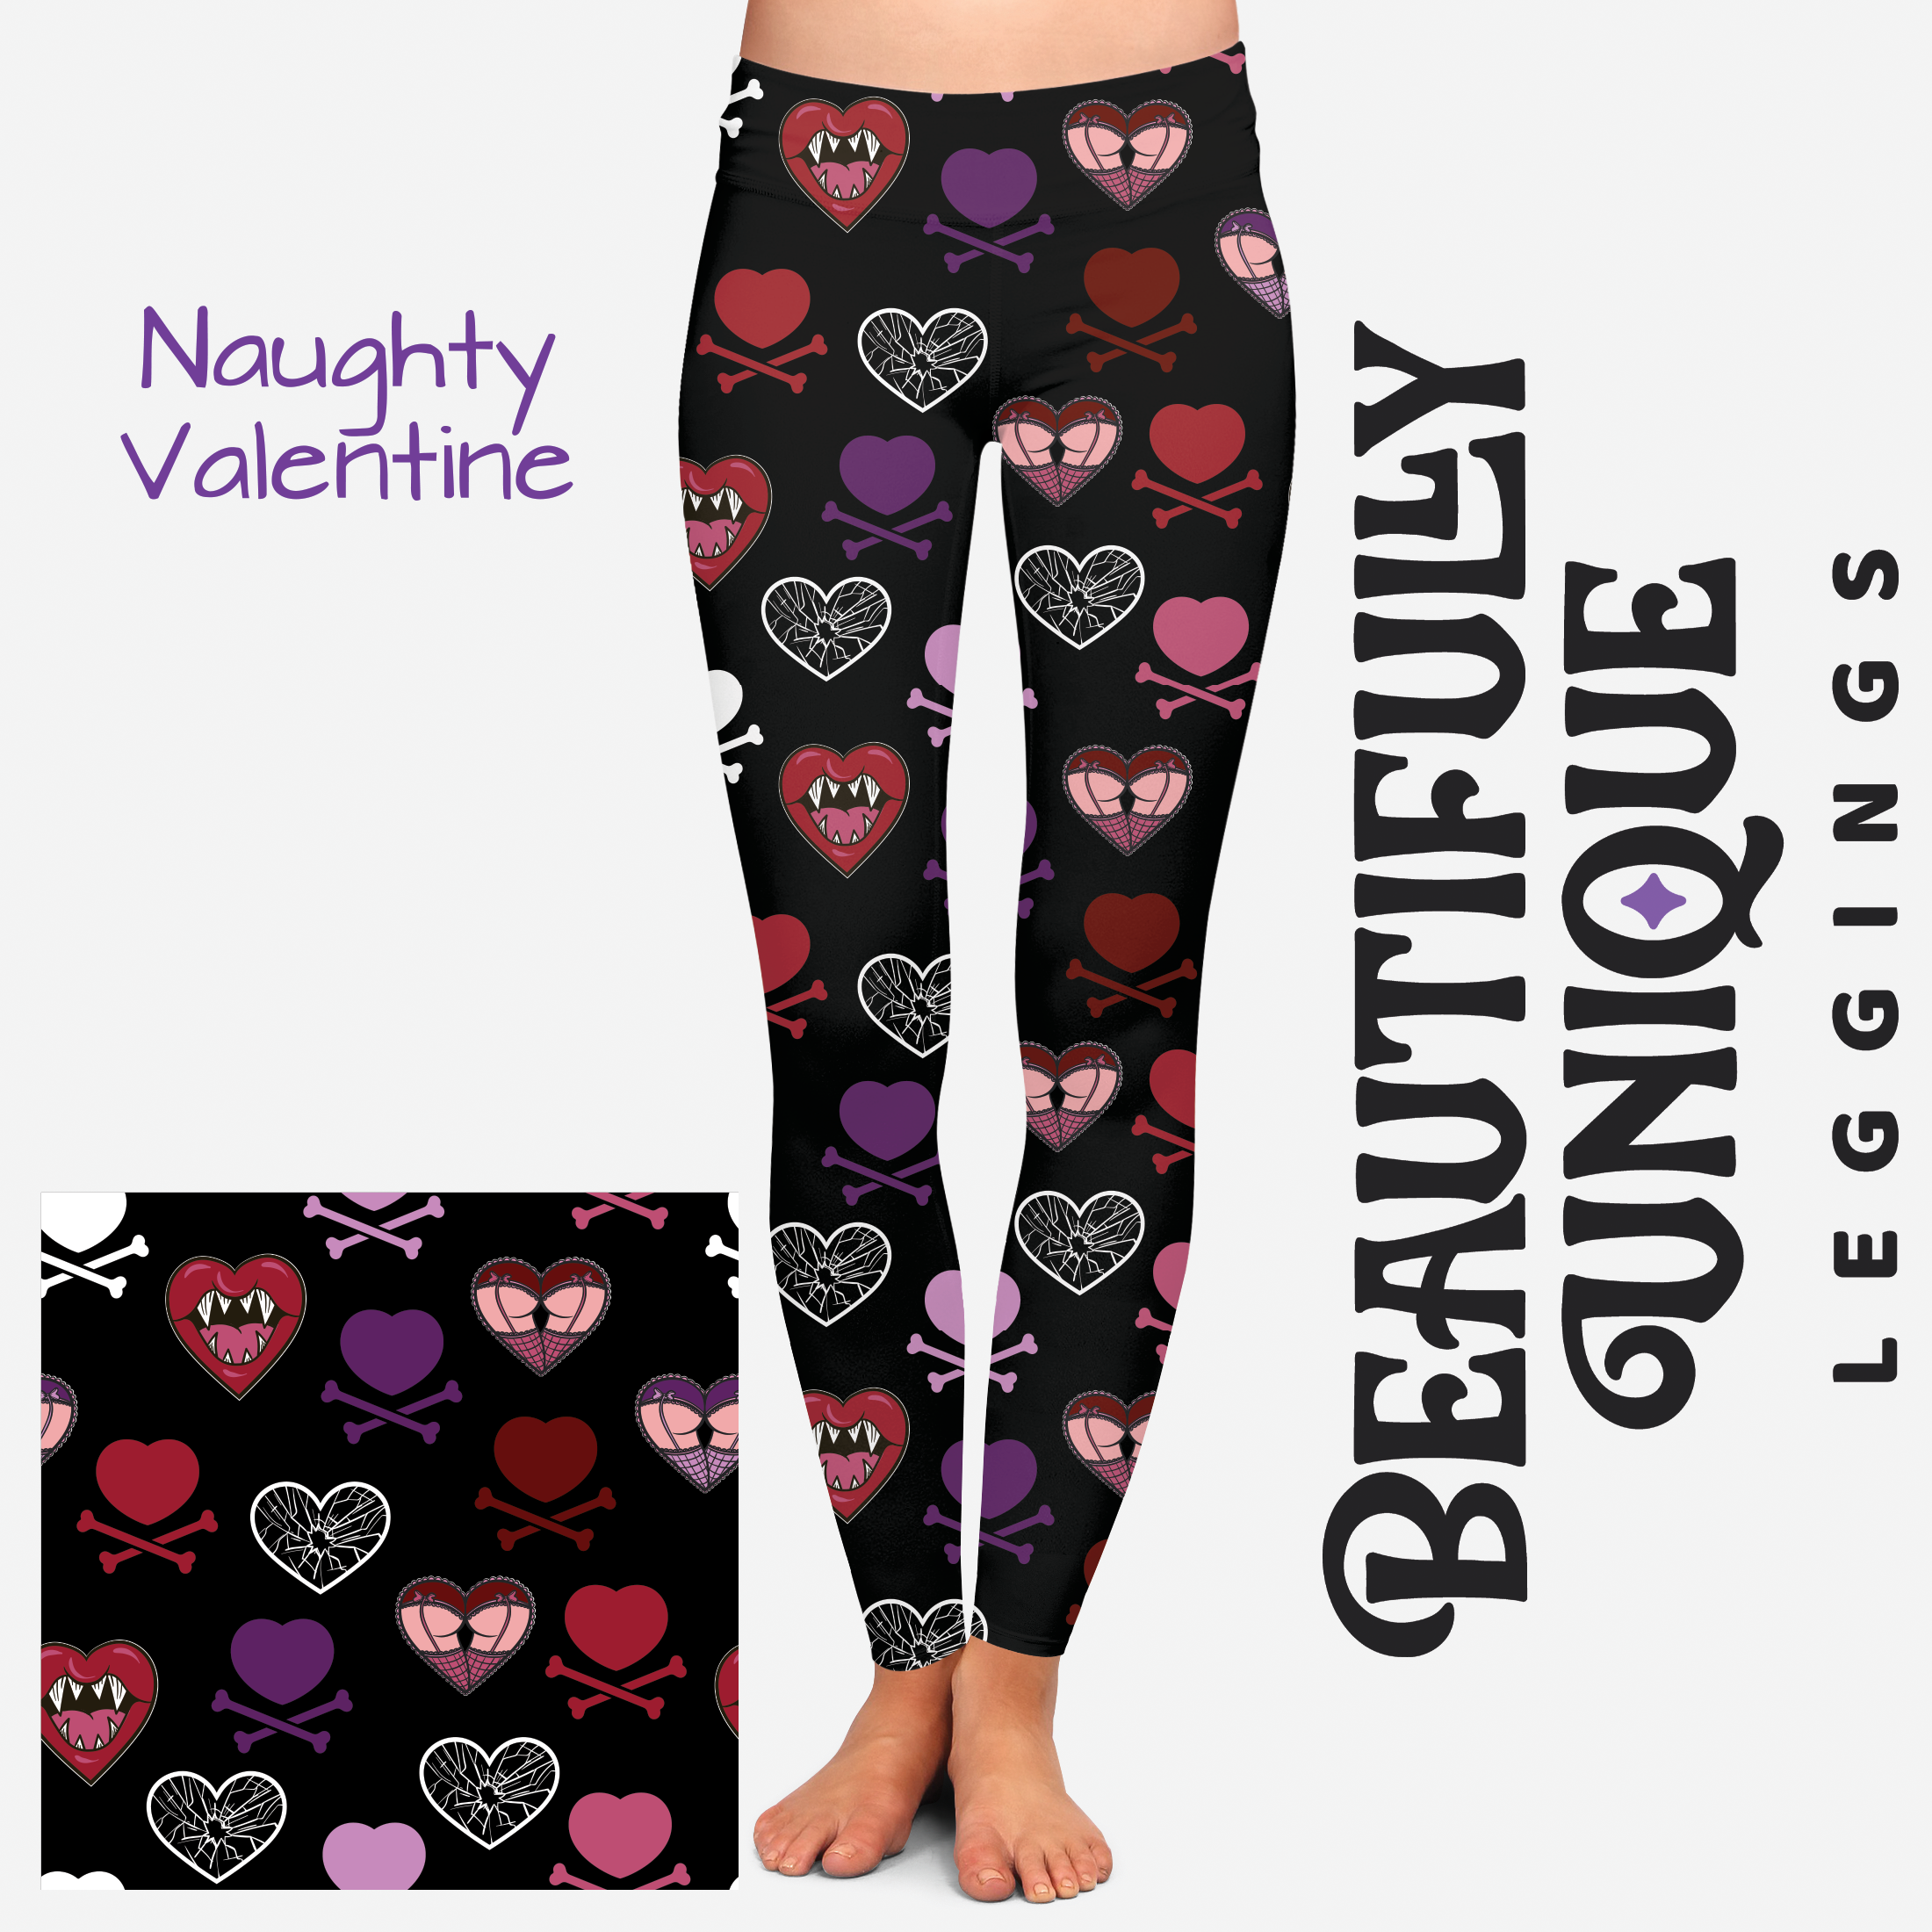 Naughty Valentine (Exclusive) - High-quality Handcrafted Vibrant Leggi –  Beautifully Unique Leggings